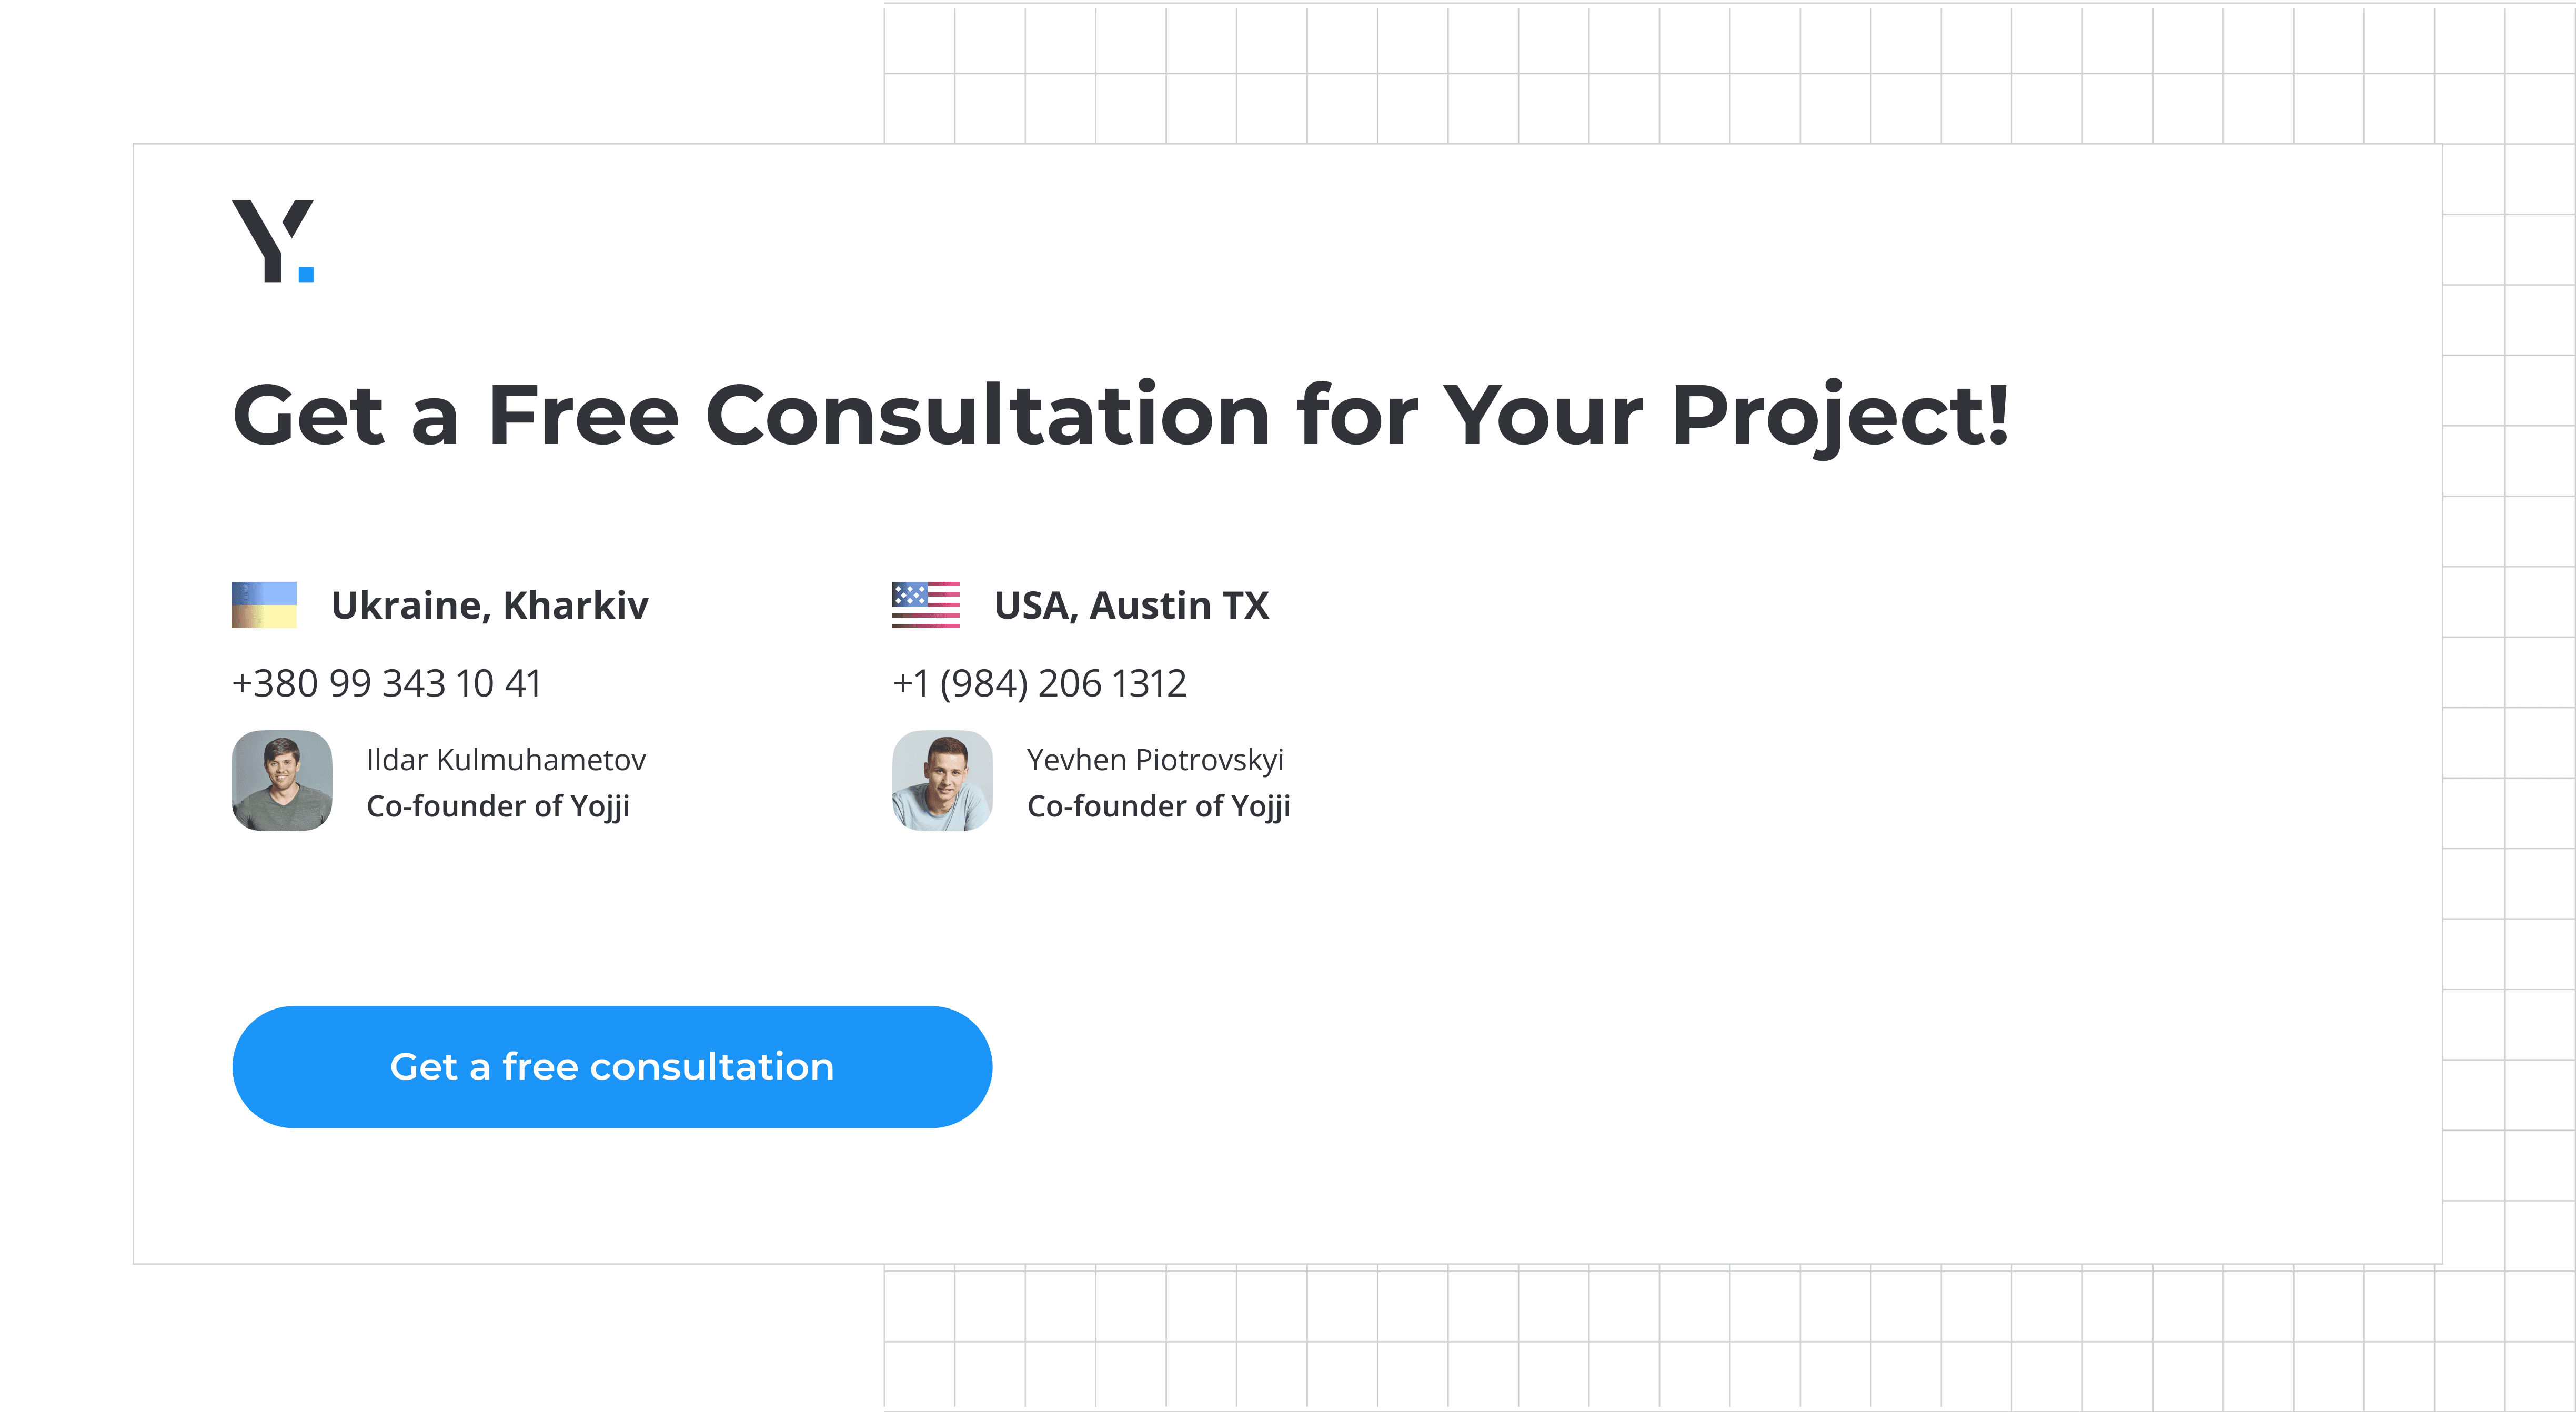 Get a Free Consultation for Your Project